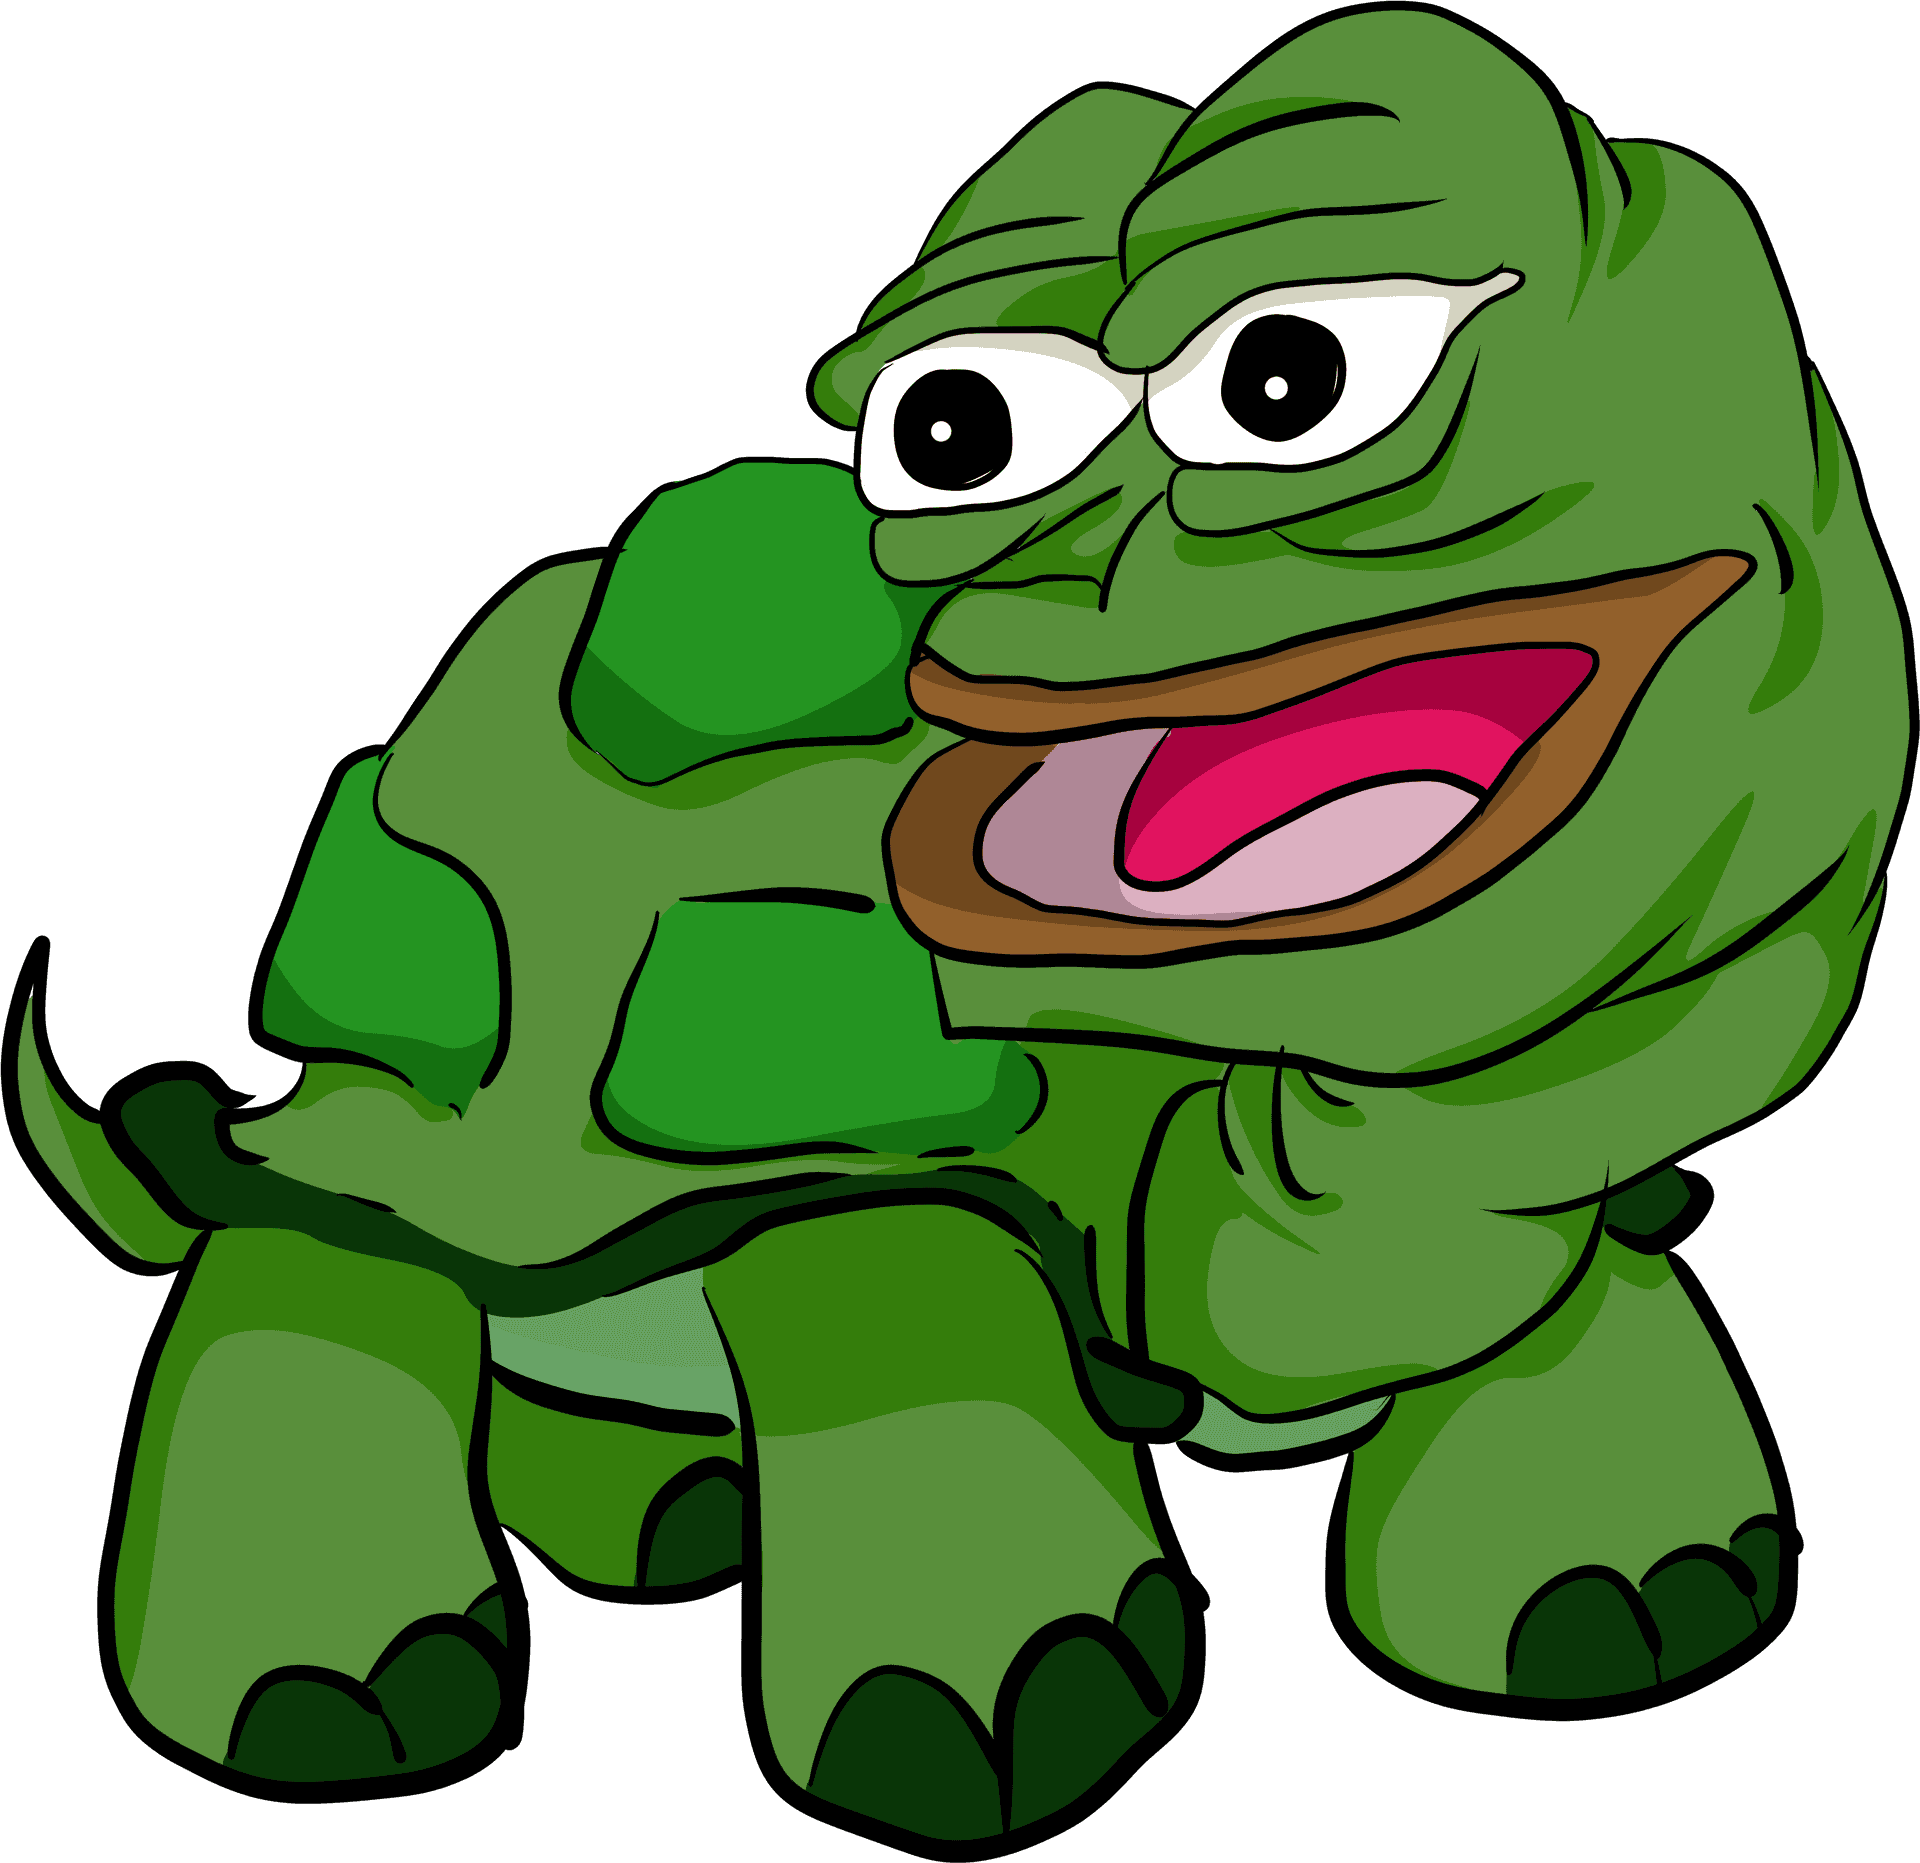 Download Pepe The Frog Cartoon 4960